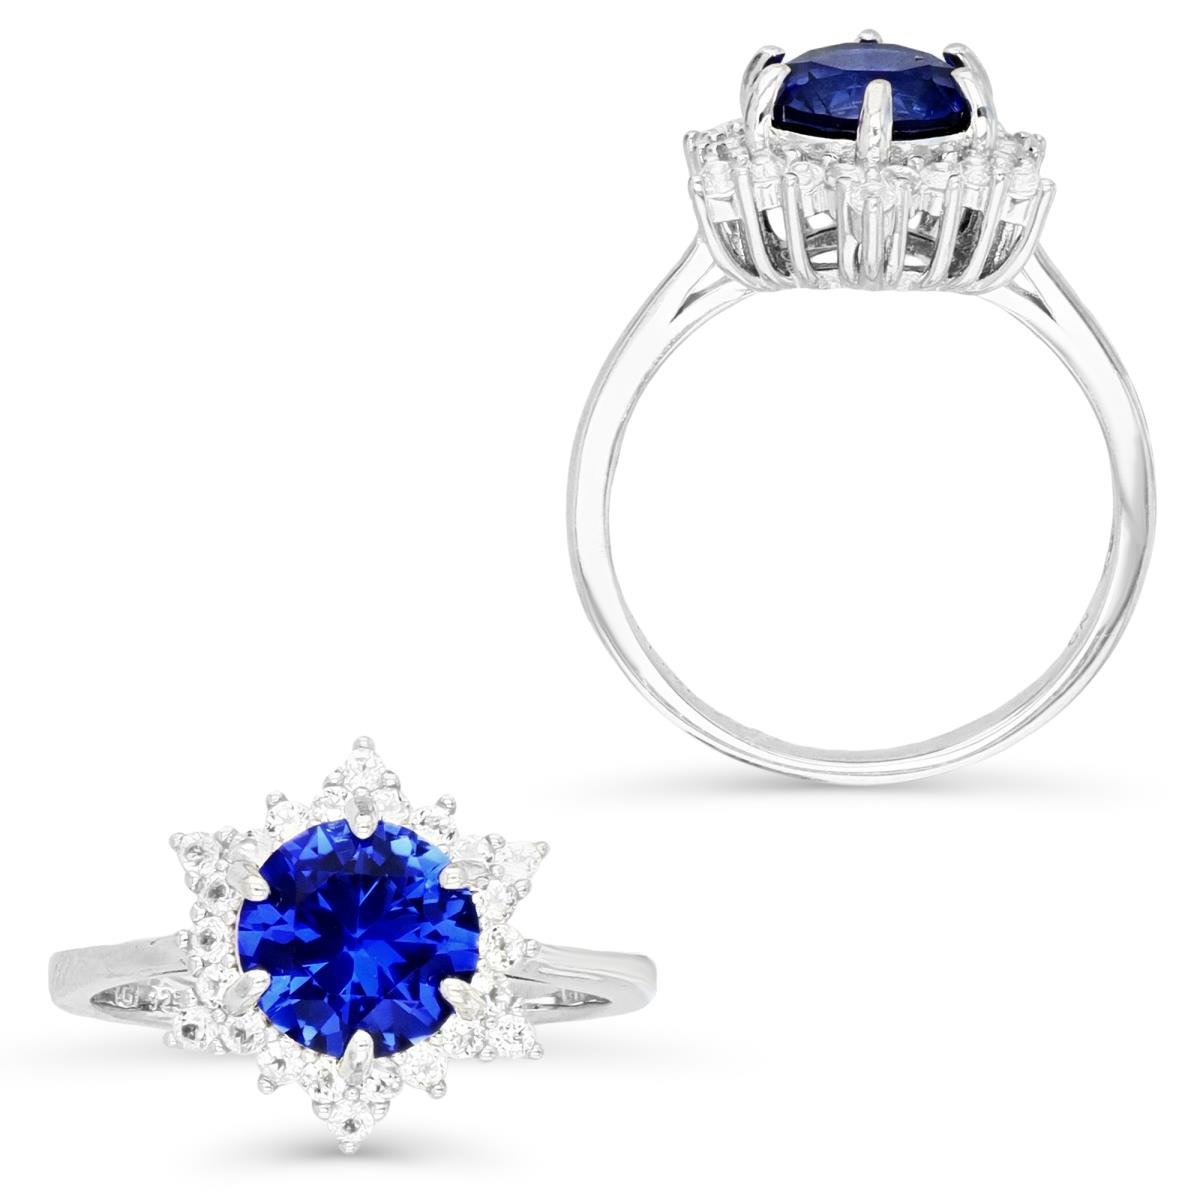 Sterling Silver Rhodium 8MM Round CR Spinel #119 Sapphire & Cr White Sapphire Halo Solitaire Engagement Ring